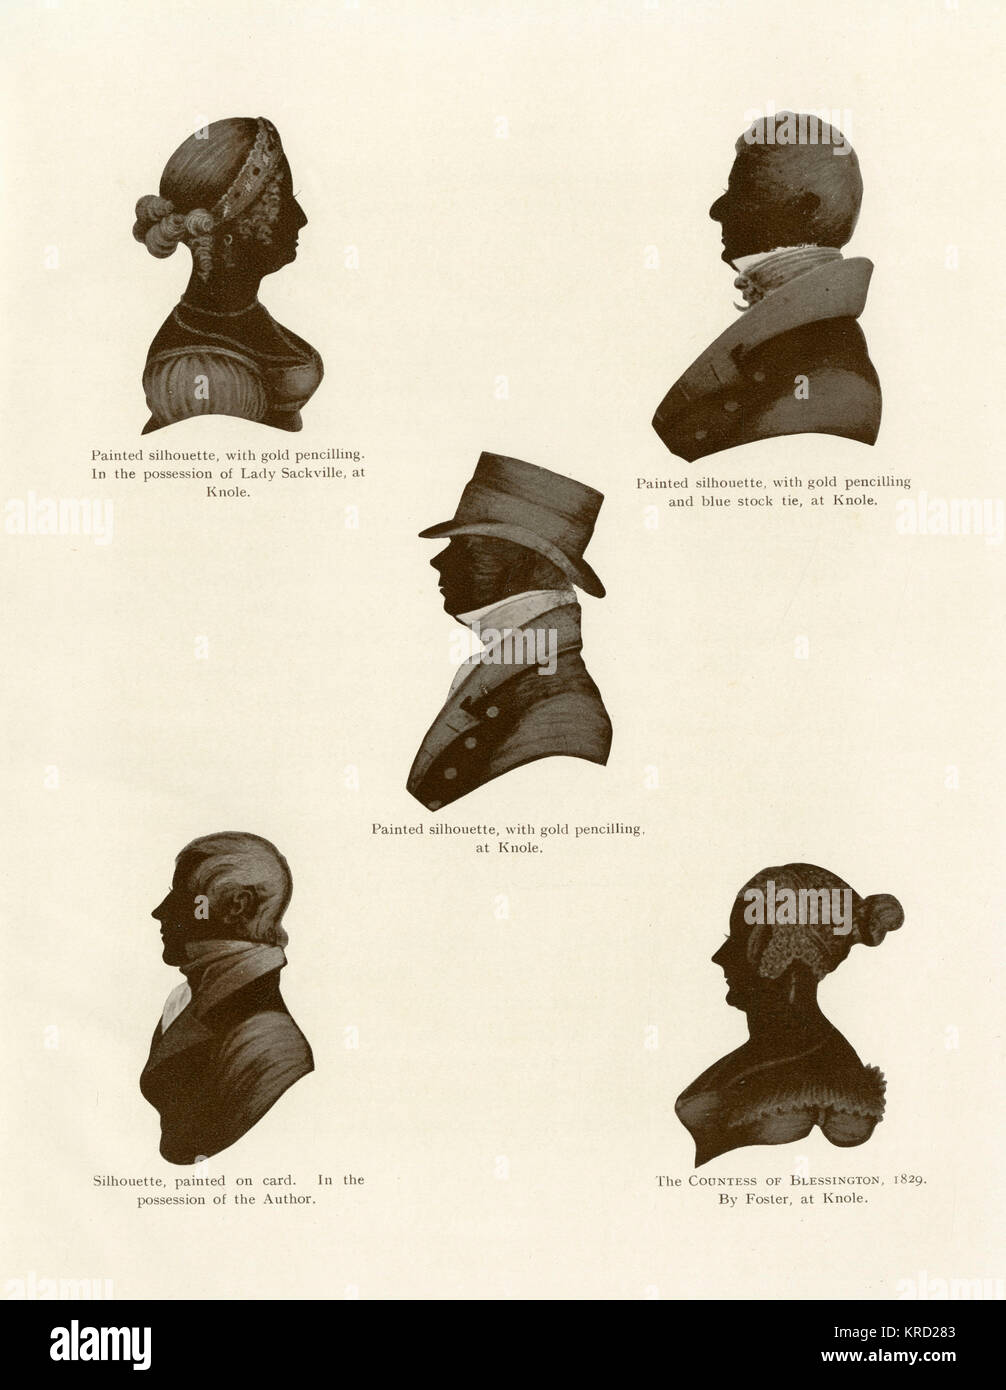 A group of silhouette portraits from the Regency period.  Clockwise from top left, a painted silhouette with gold pencilling, a dandyish gentleman in a blue stock tie (silhouette again with gold pencilling), Marguerite, Countess of Blessington (1789 - 1949), a gentleman and, middle, a painted silhouette with gold pencil of a gentleman in a hat with high colour      Date: c.1800 Stock Photo